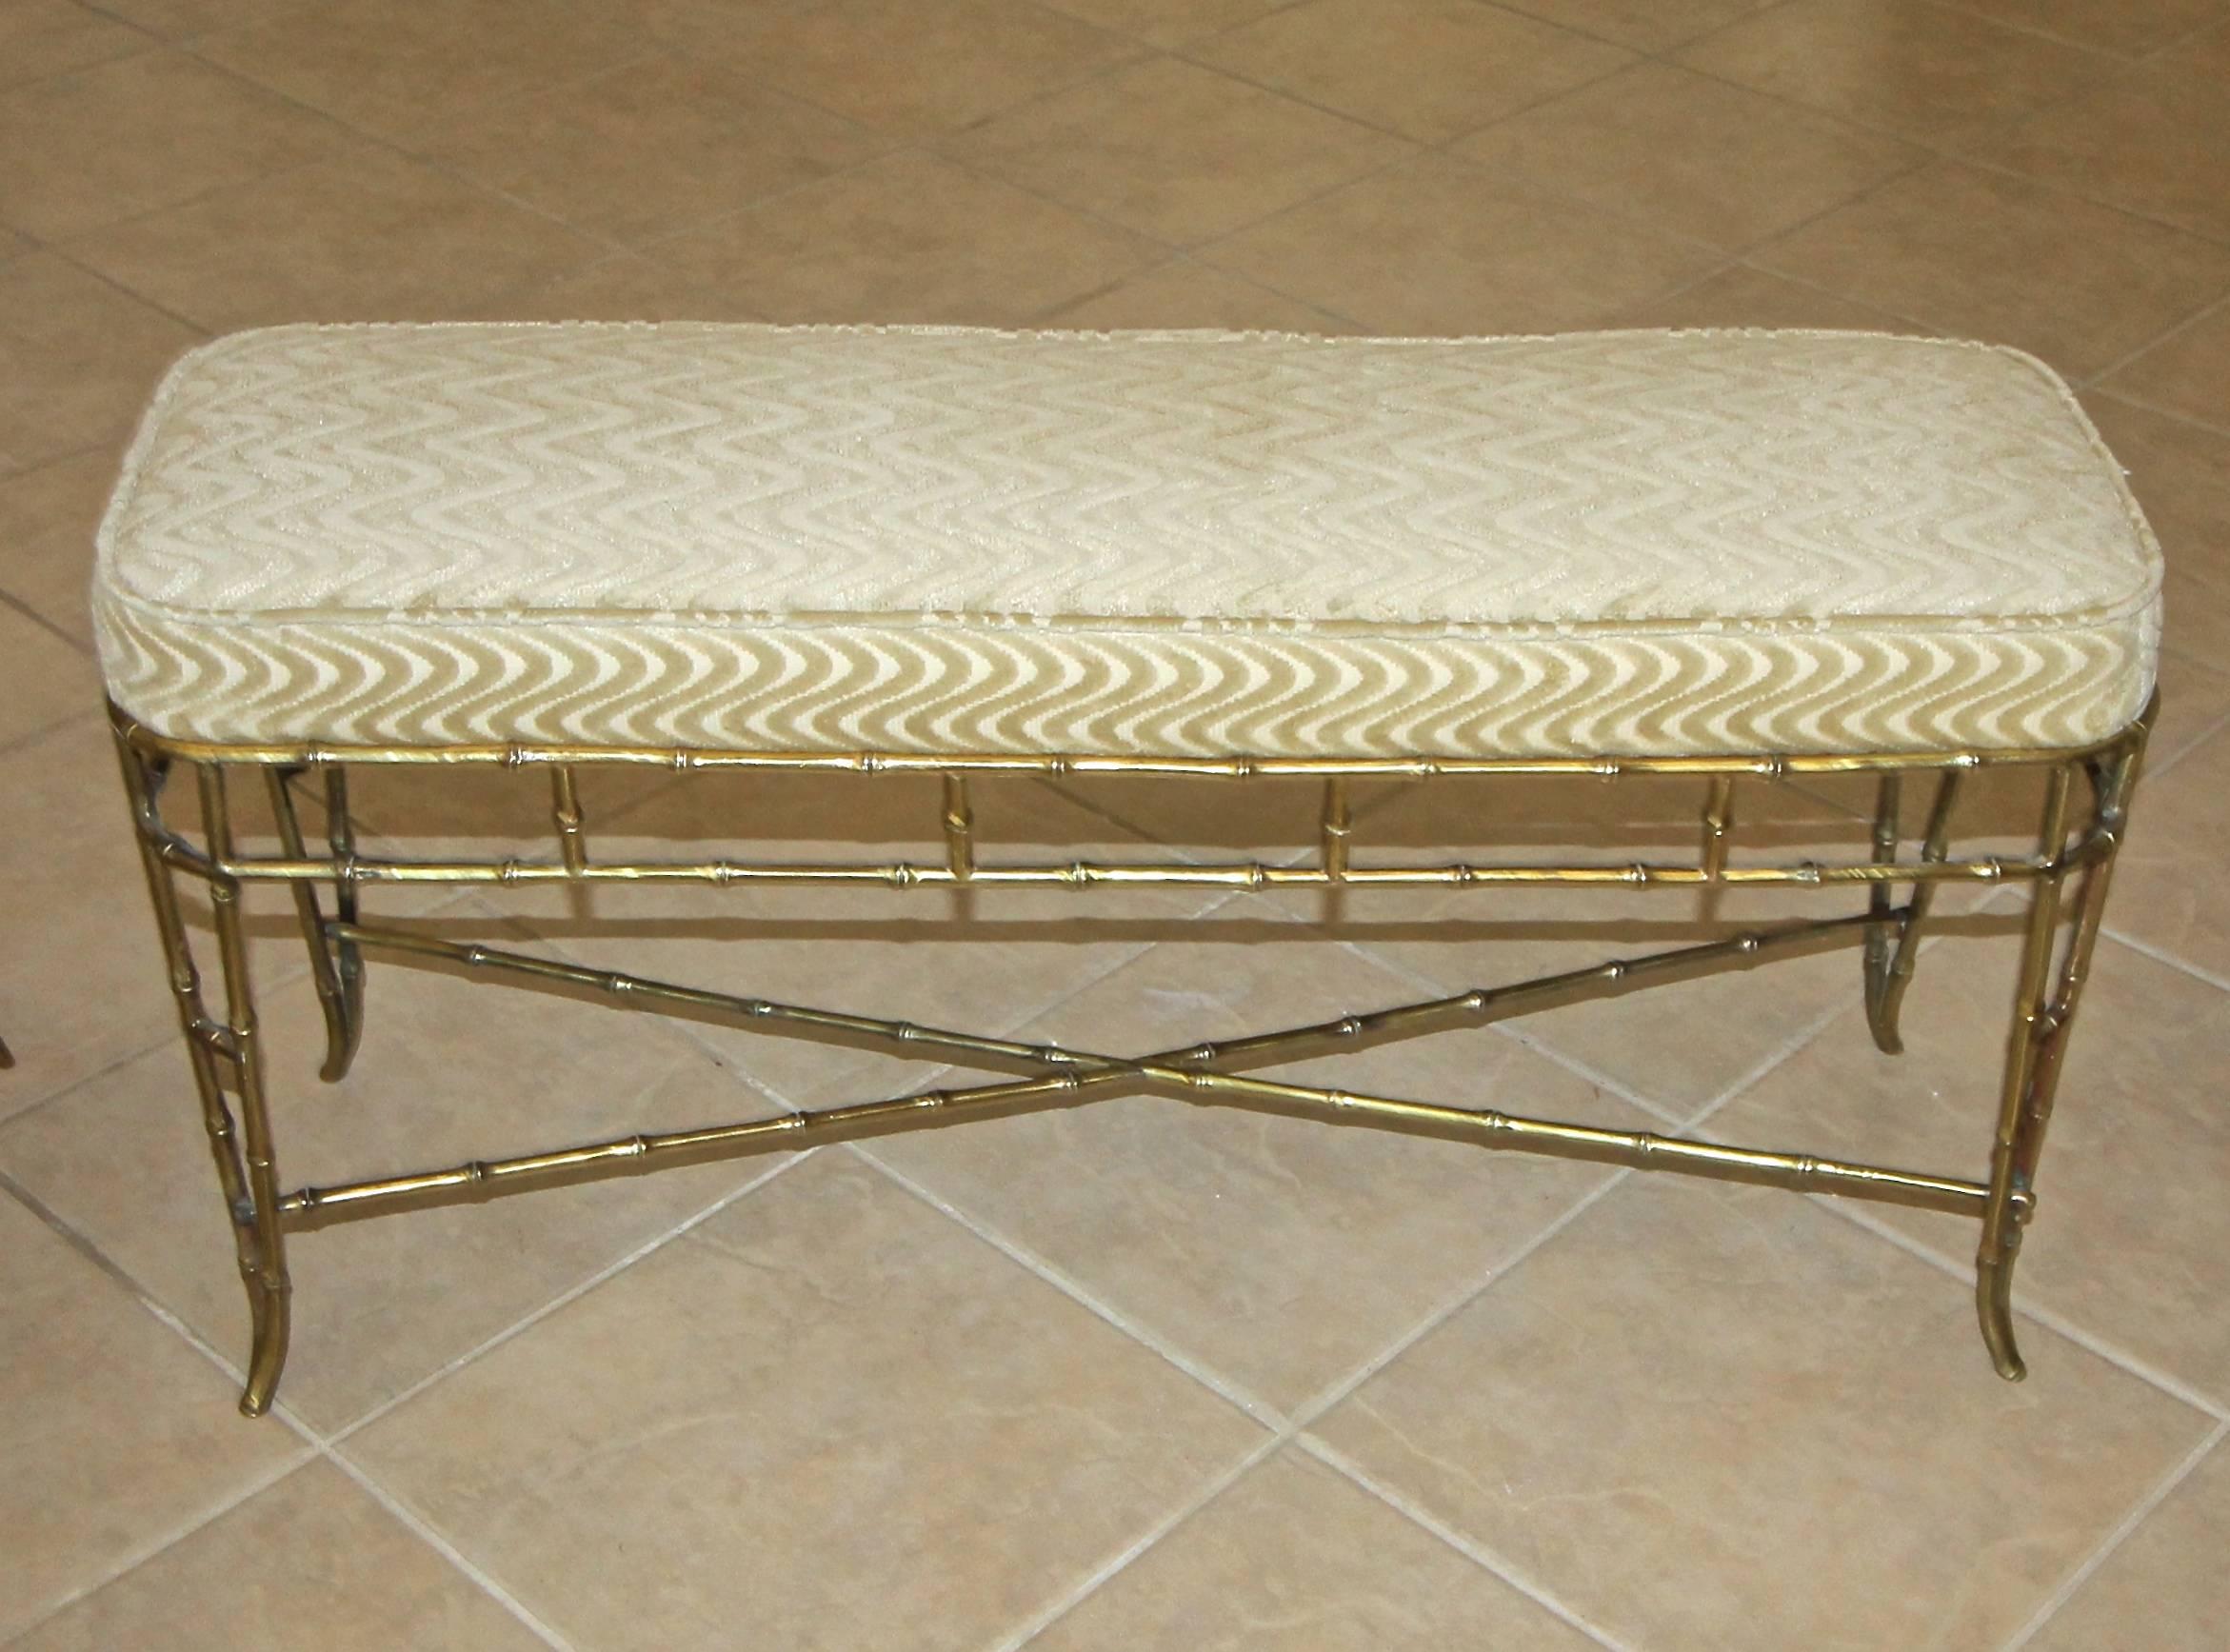 French Bagues style faux brass bamboo upholstered bench. Solid heavy construction with X-stretcher support. Newly upholstered in cream swirl pattern cut velvet fabric.